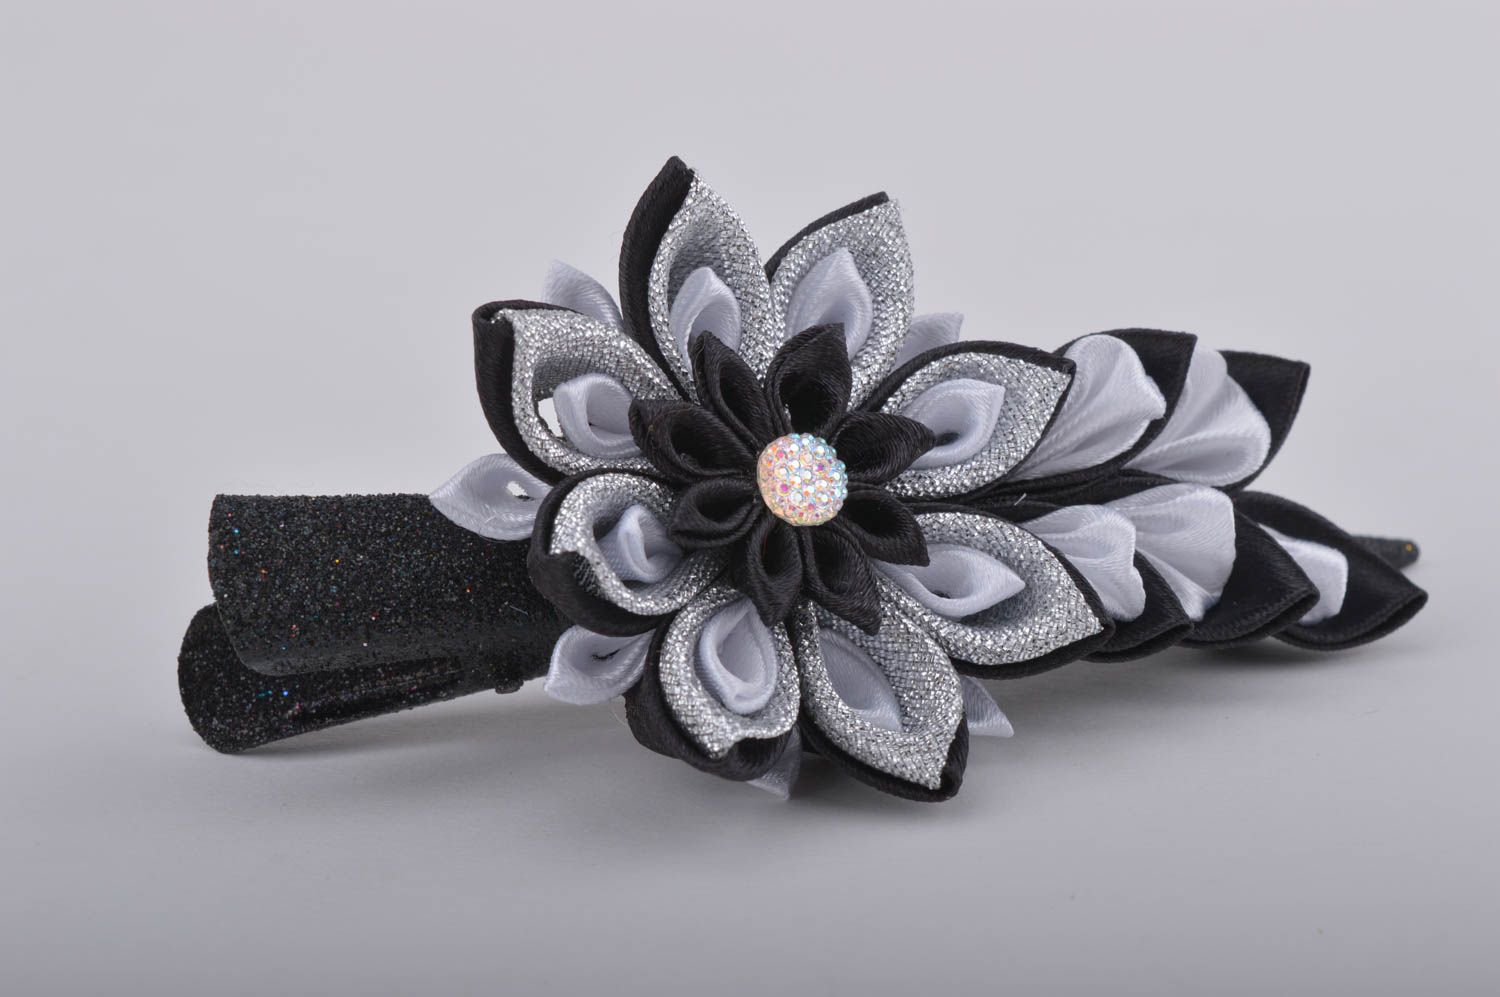 Stylish handmade textile barrette flower hair clip flowers in hair small gifts photo 4